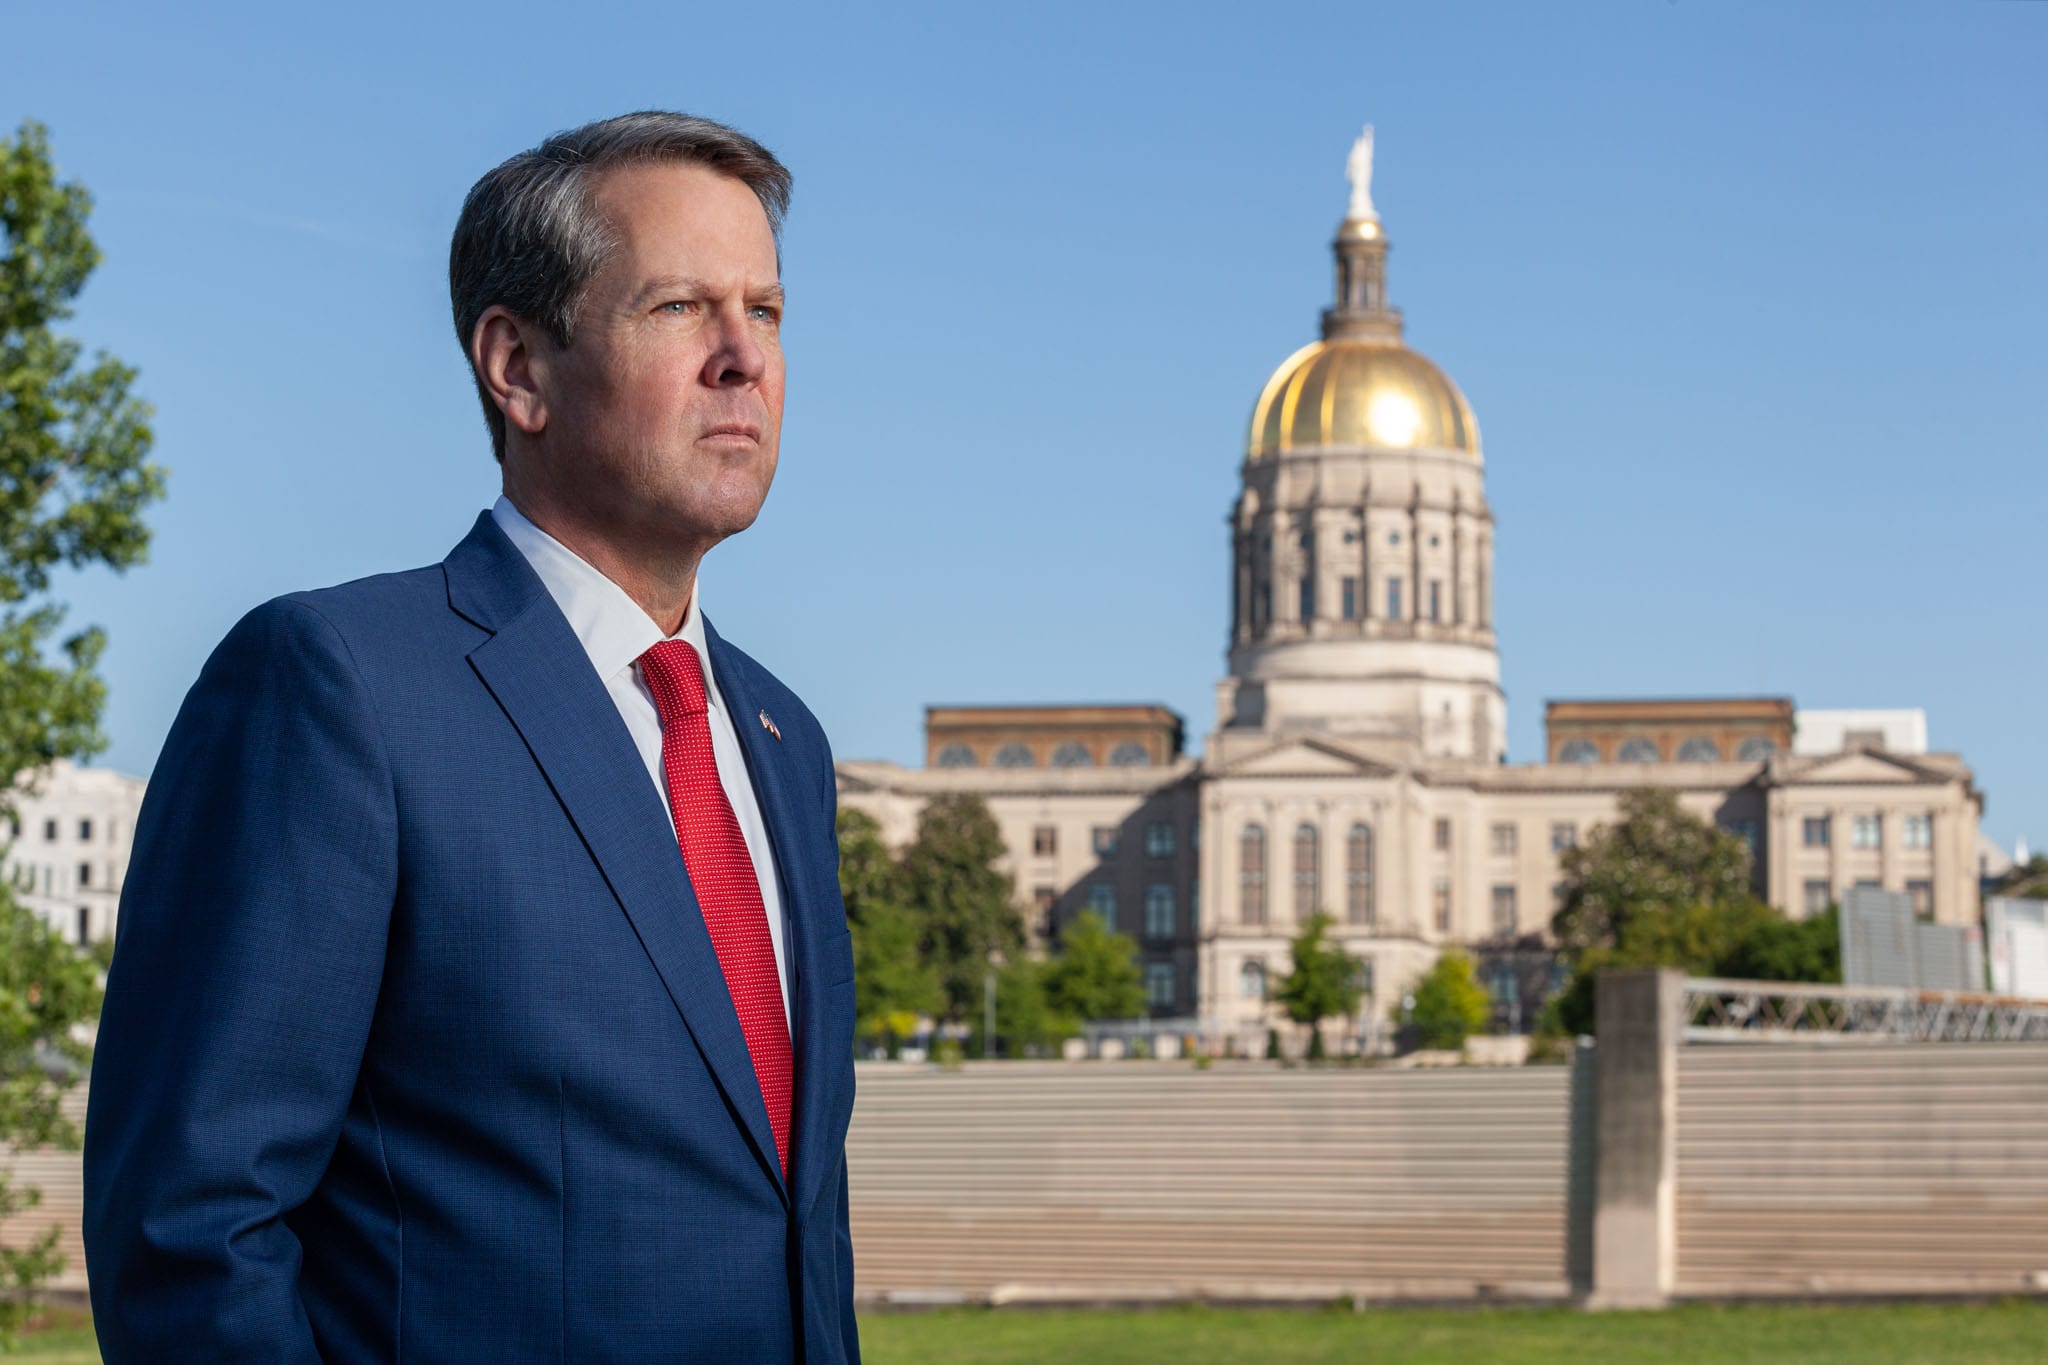 Georgia Governor Brian Kemp staring sternly in front of the Georgia State Capitol.